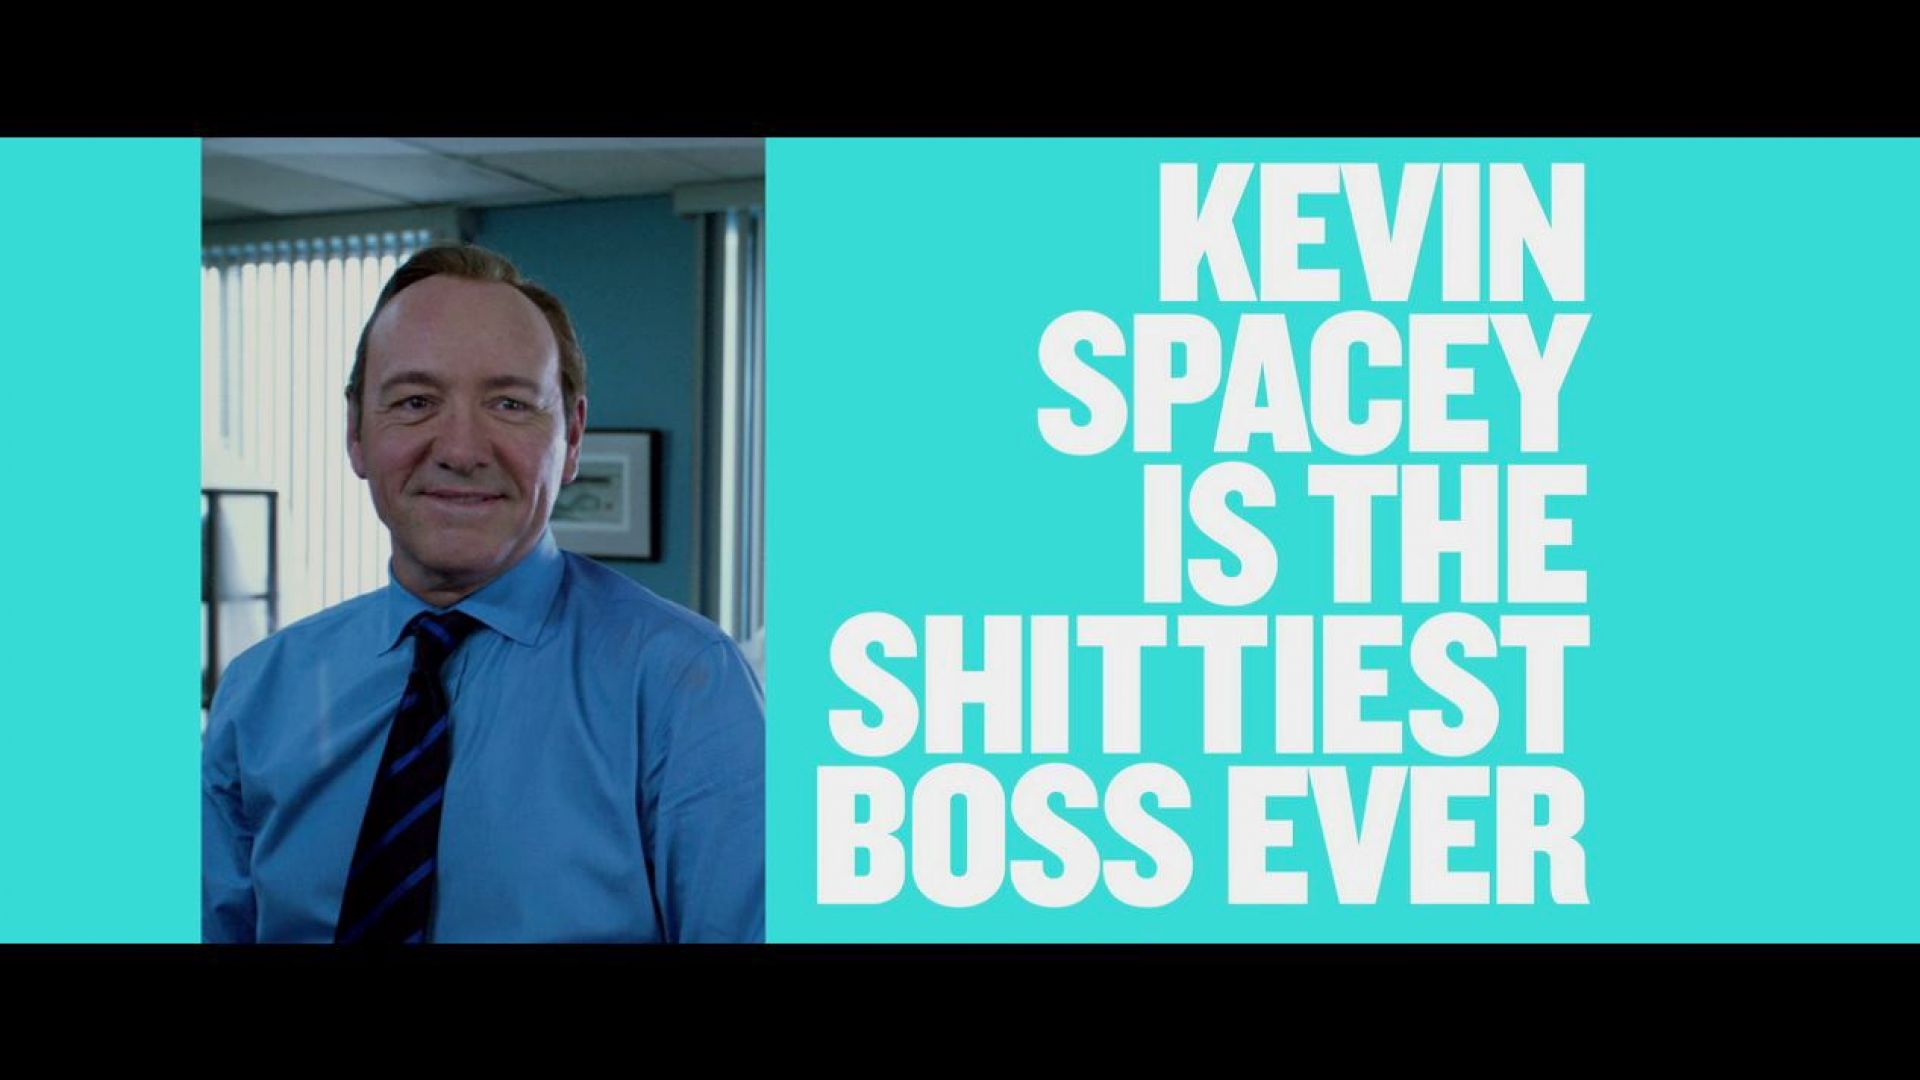 You can trust me. Now you sound like my wife. Kevin Spacey in Horrible Bosses